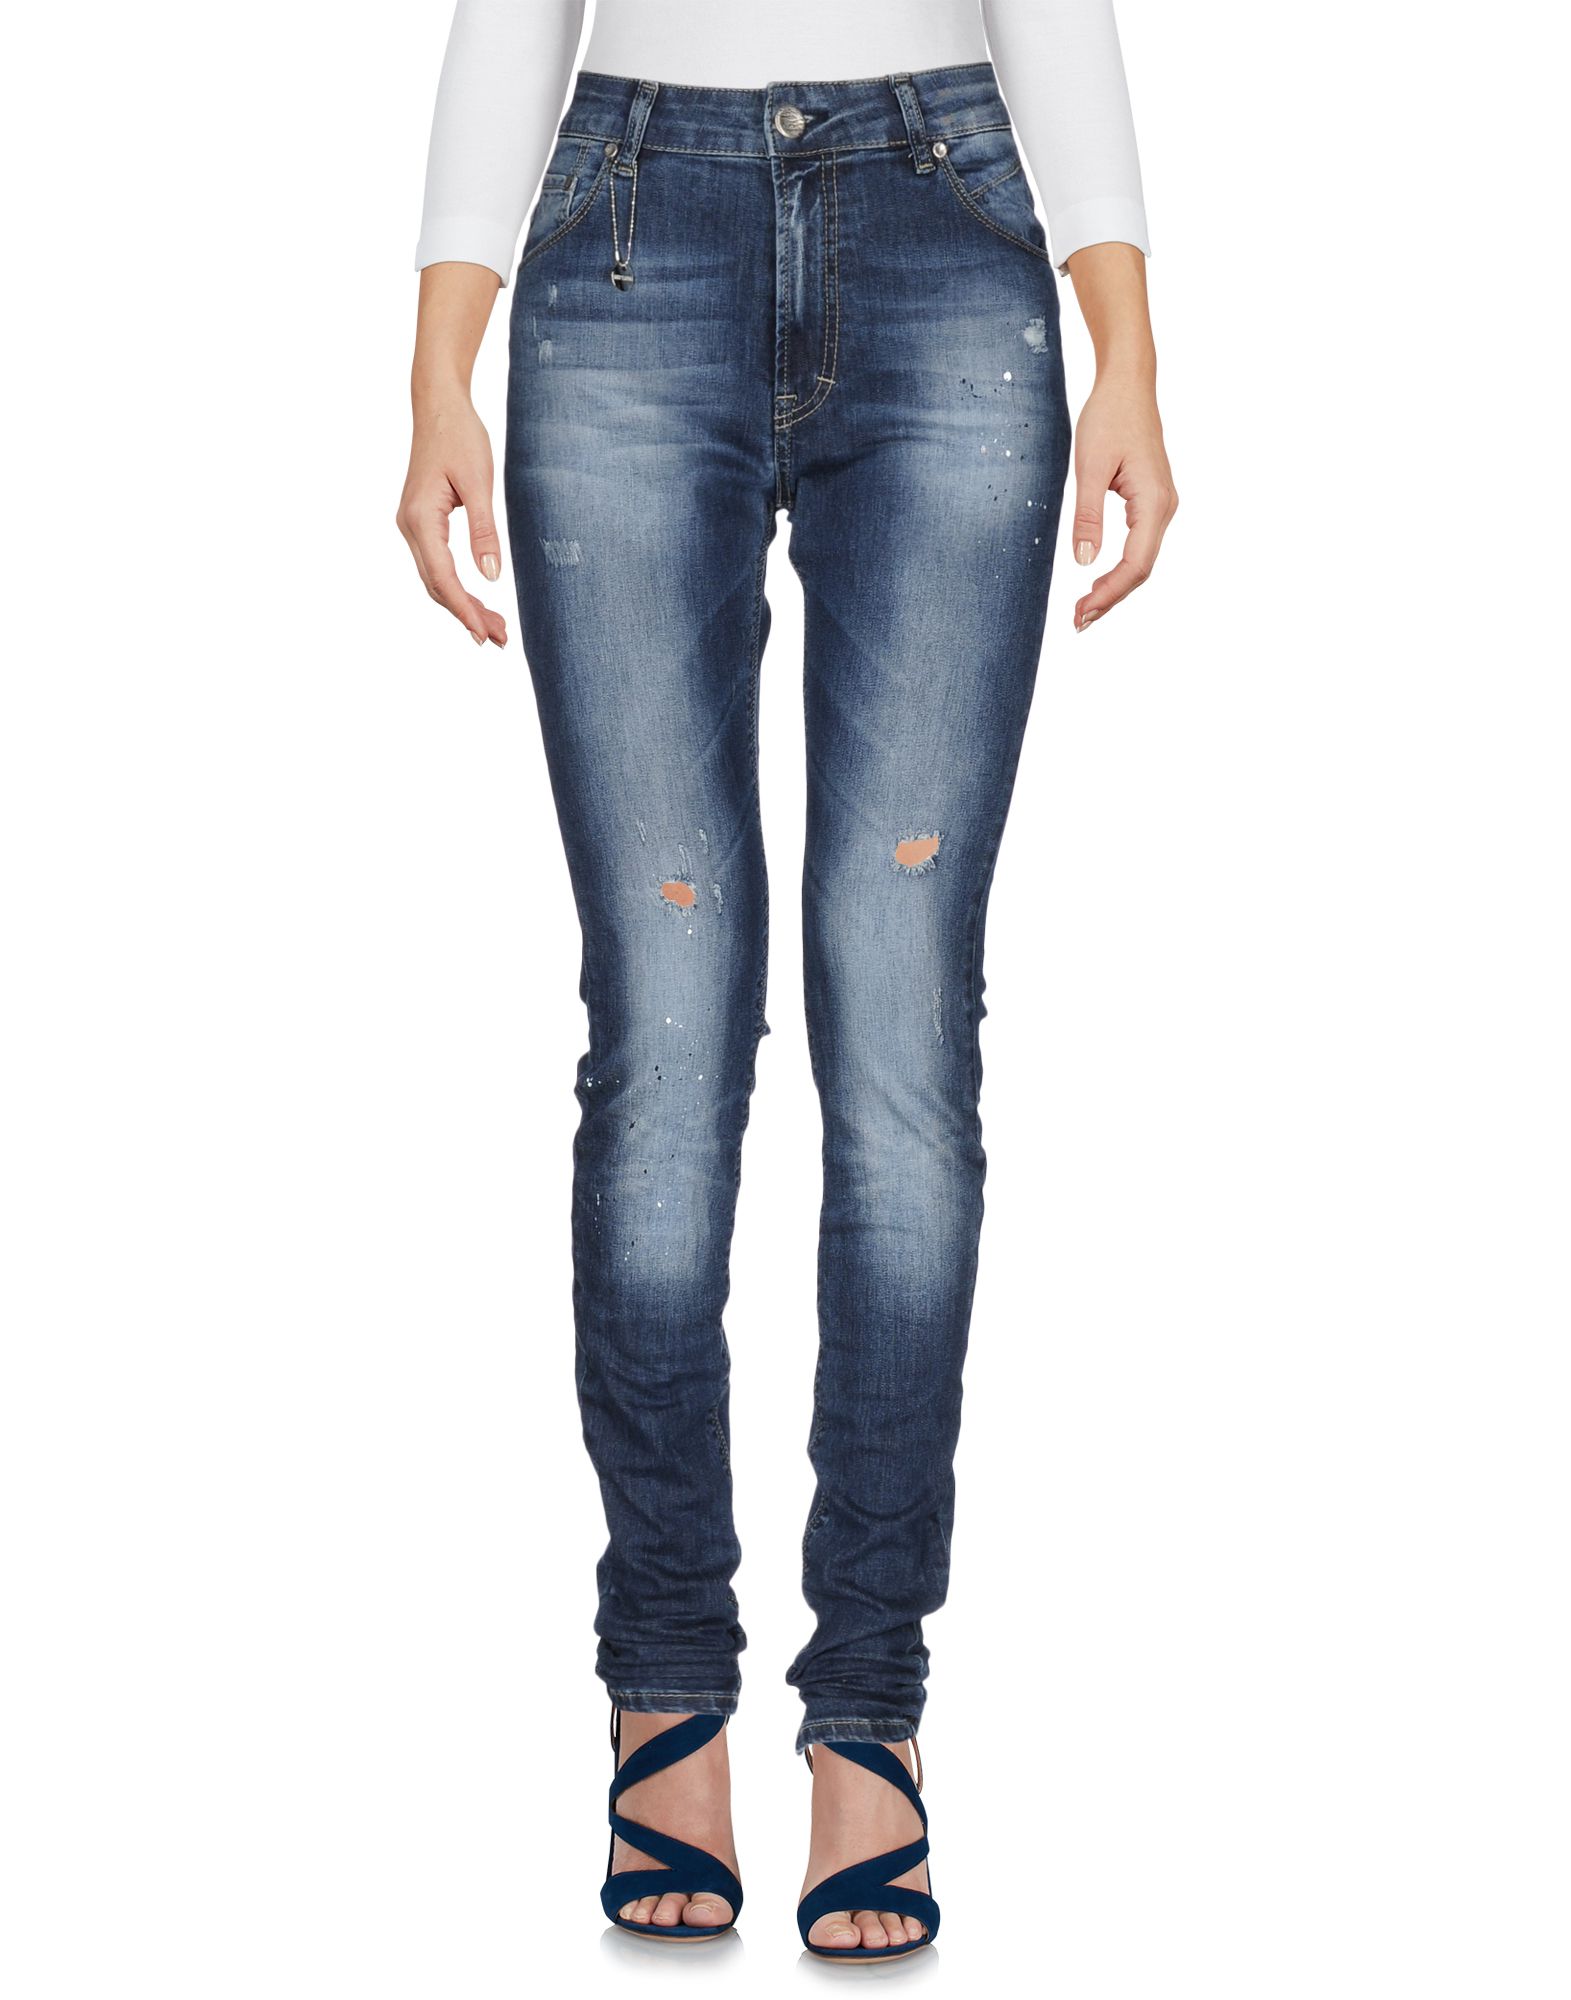 Imperial Jeans | Shop at Ebates